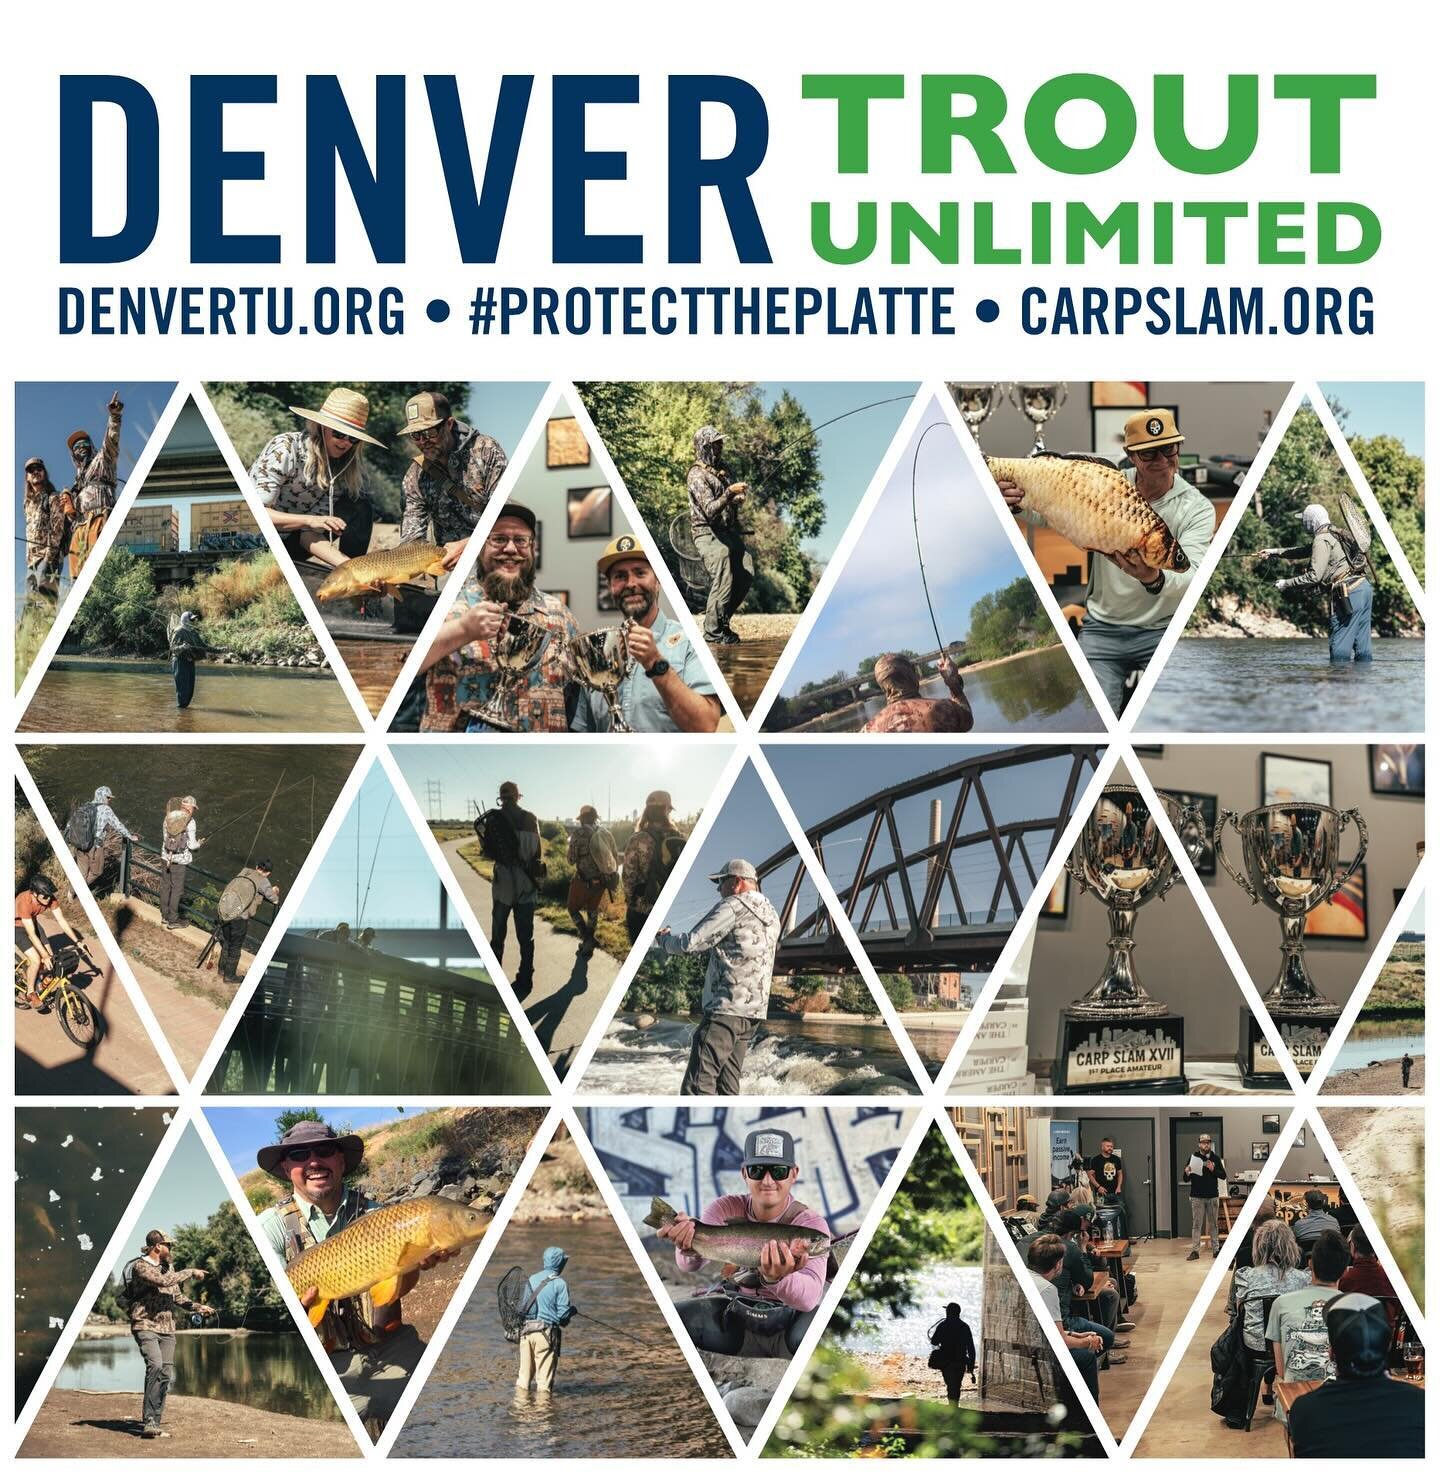 Lots of fun stuff happening at the Fly Fishing Expo Jan. 19, 20, &amp; 21 at Gaylord of the Rockies! Stop by our new Denver Trout Unlimited booth to chat all things DSP, win some sweet CarpSlamXVII pint glasses and DTU swag bags, or donate to DTU to 